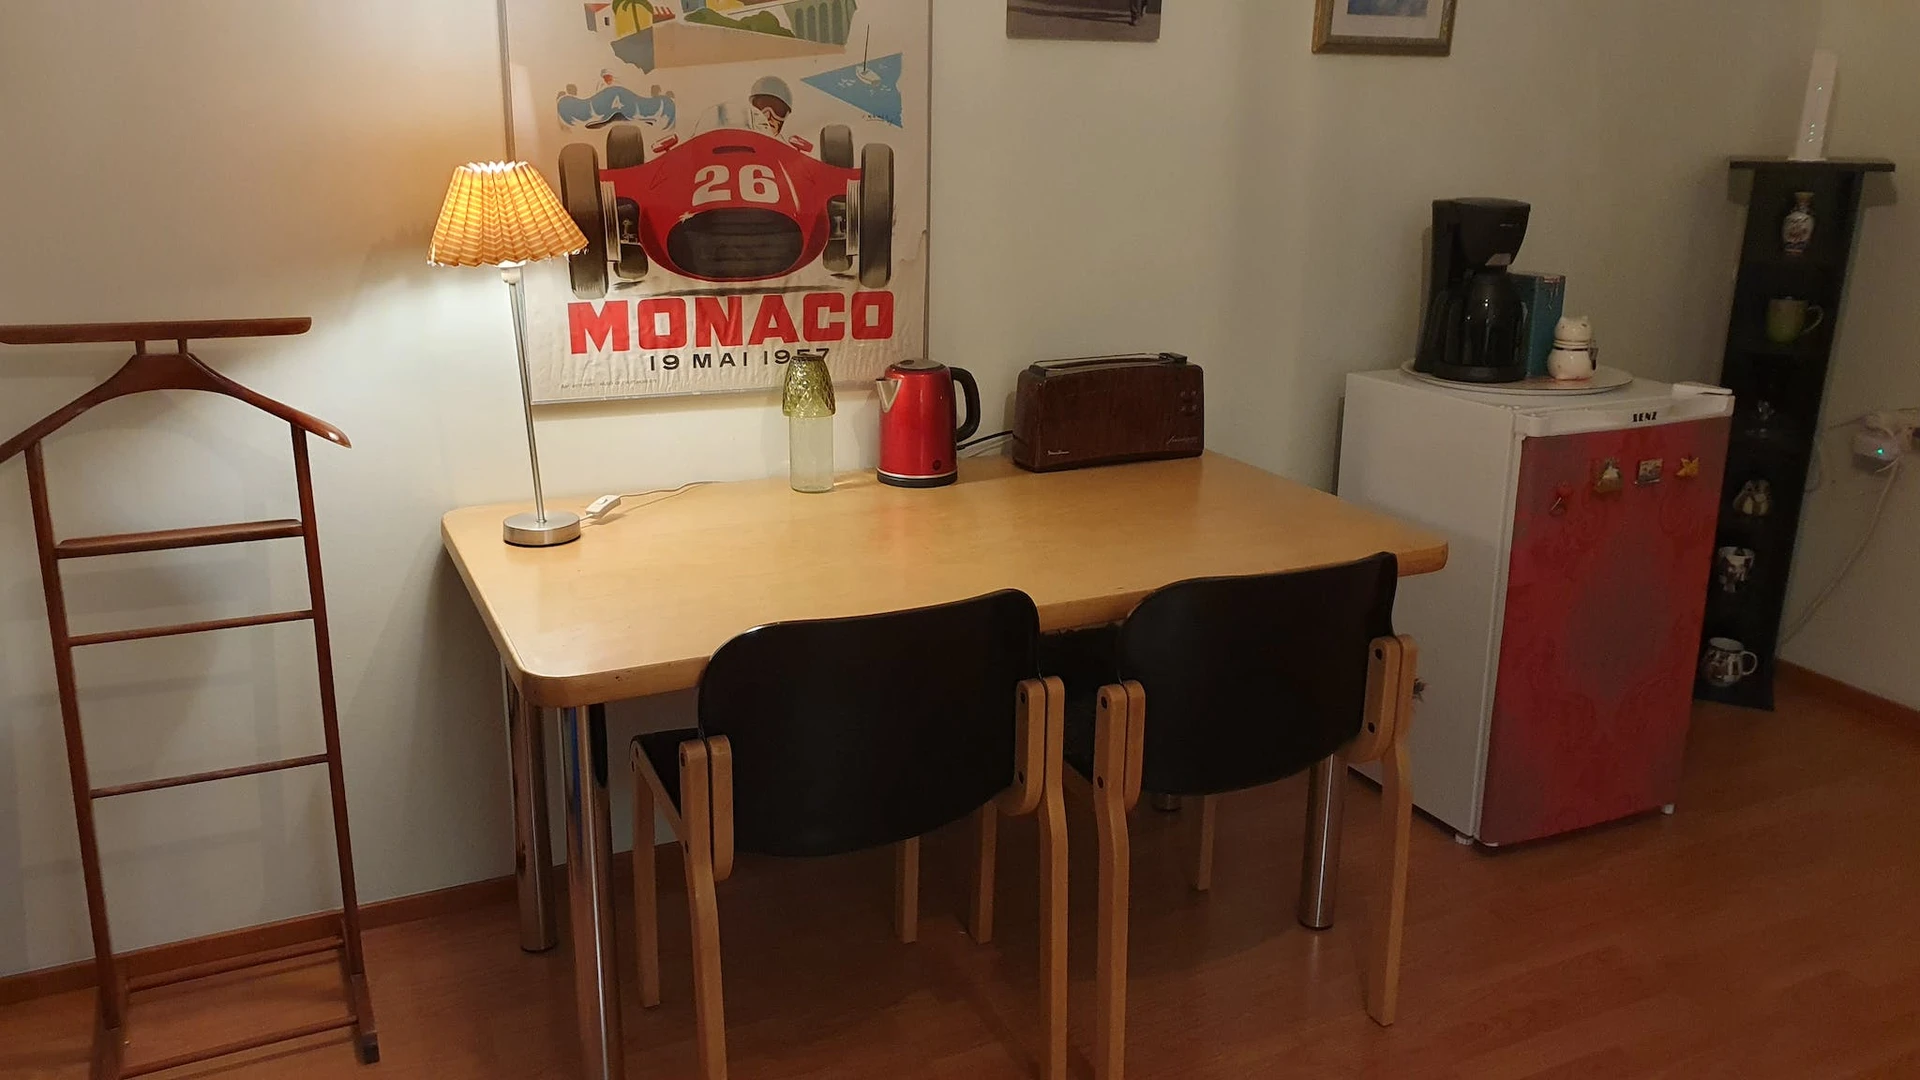 Room for rent with double bed Helsinki